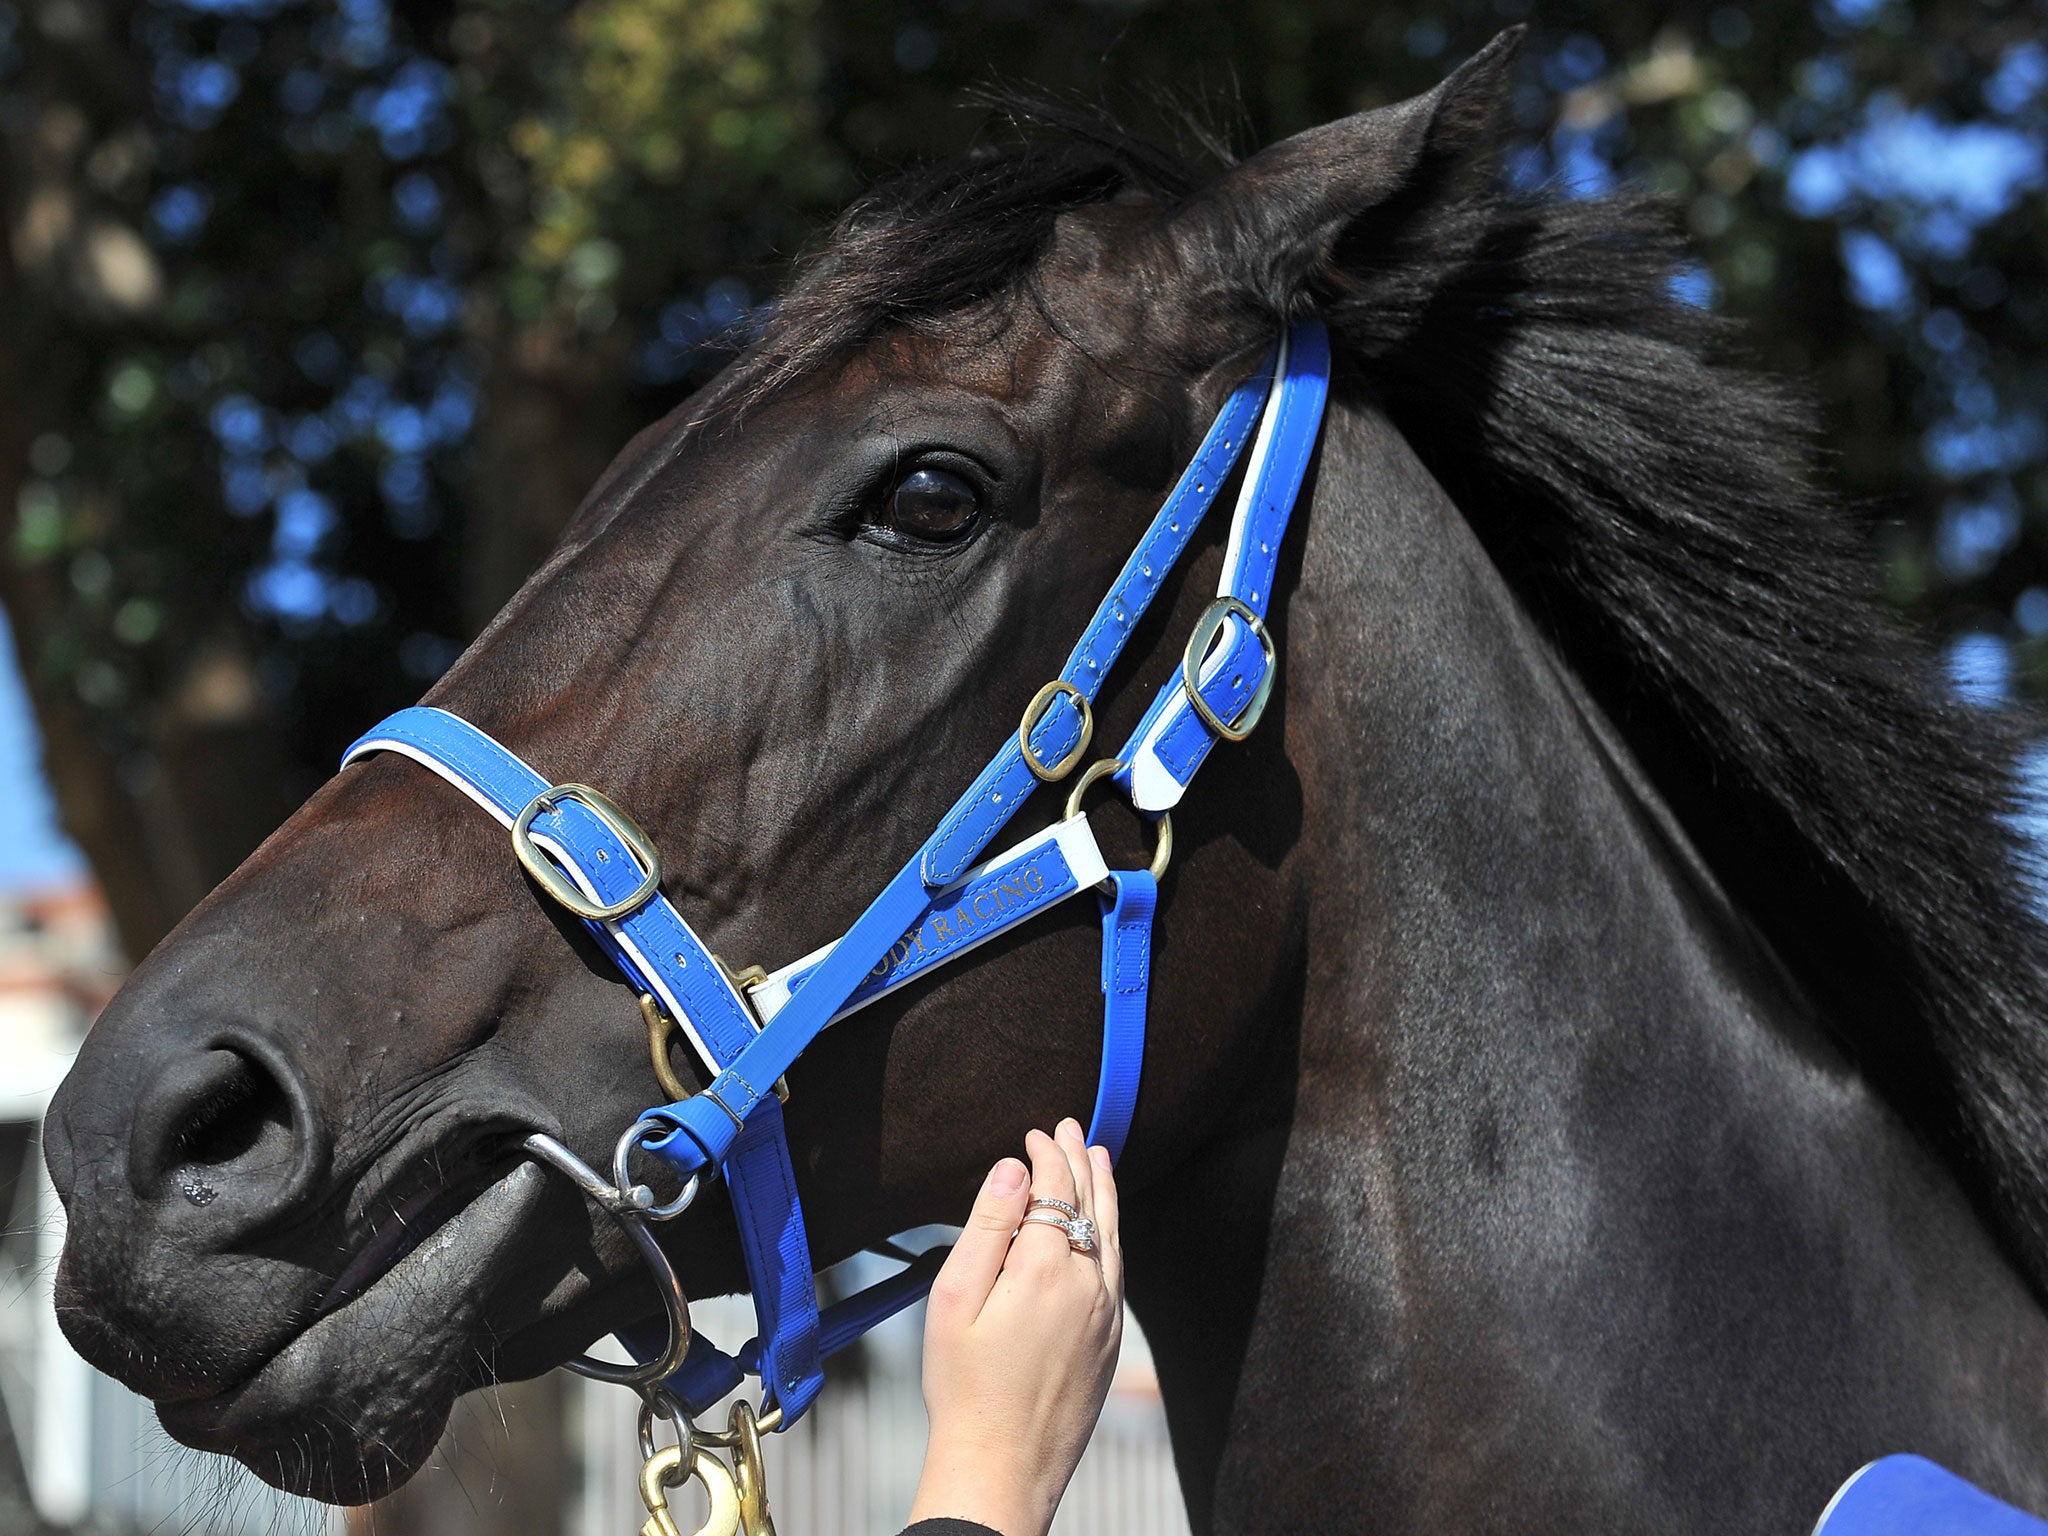 Jimmy's half-brother Black Caviar was retired earlier this year after a stellar career